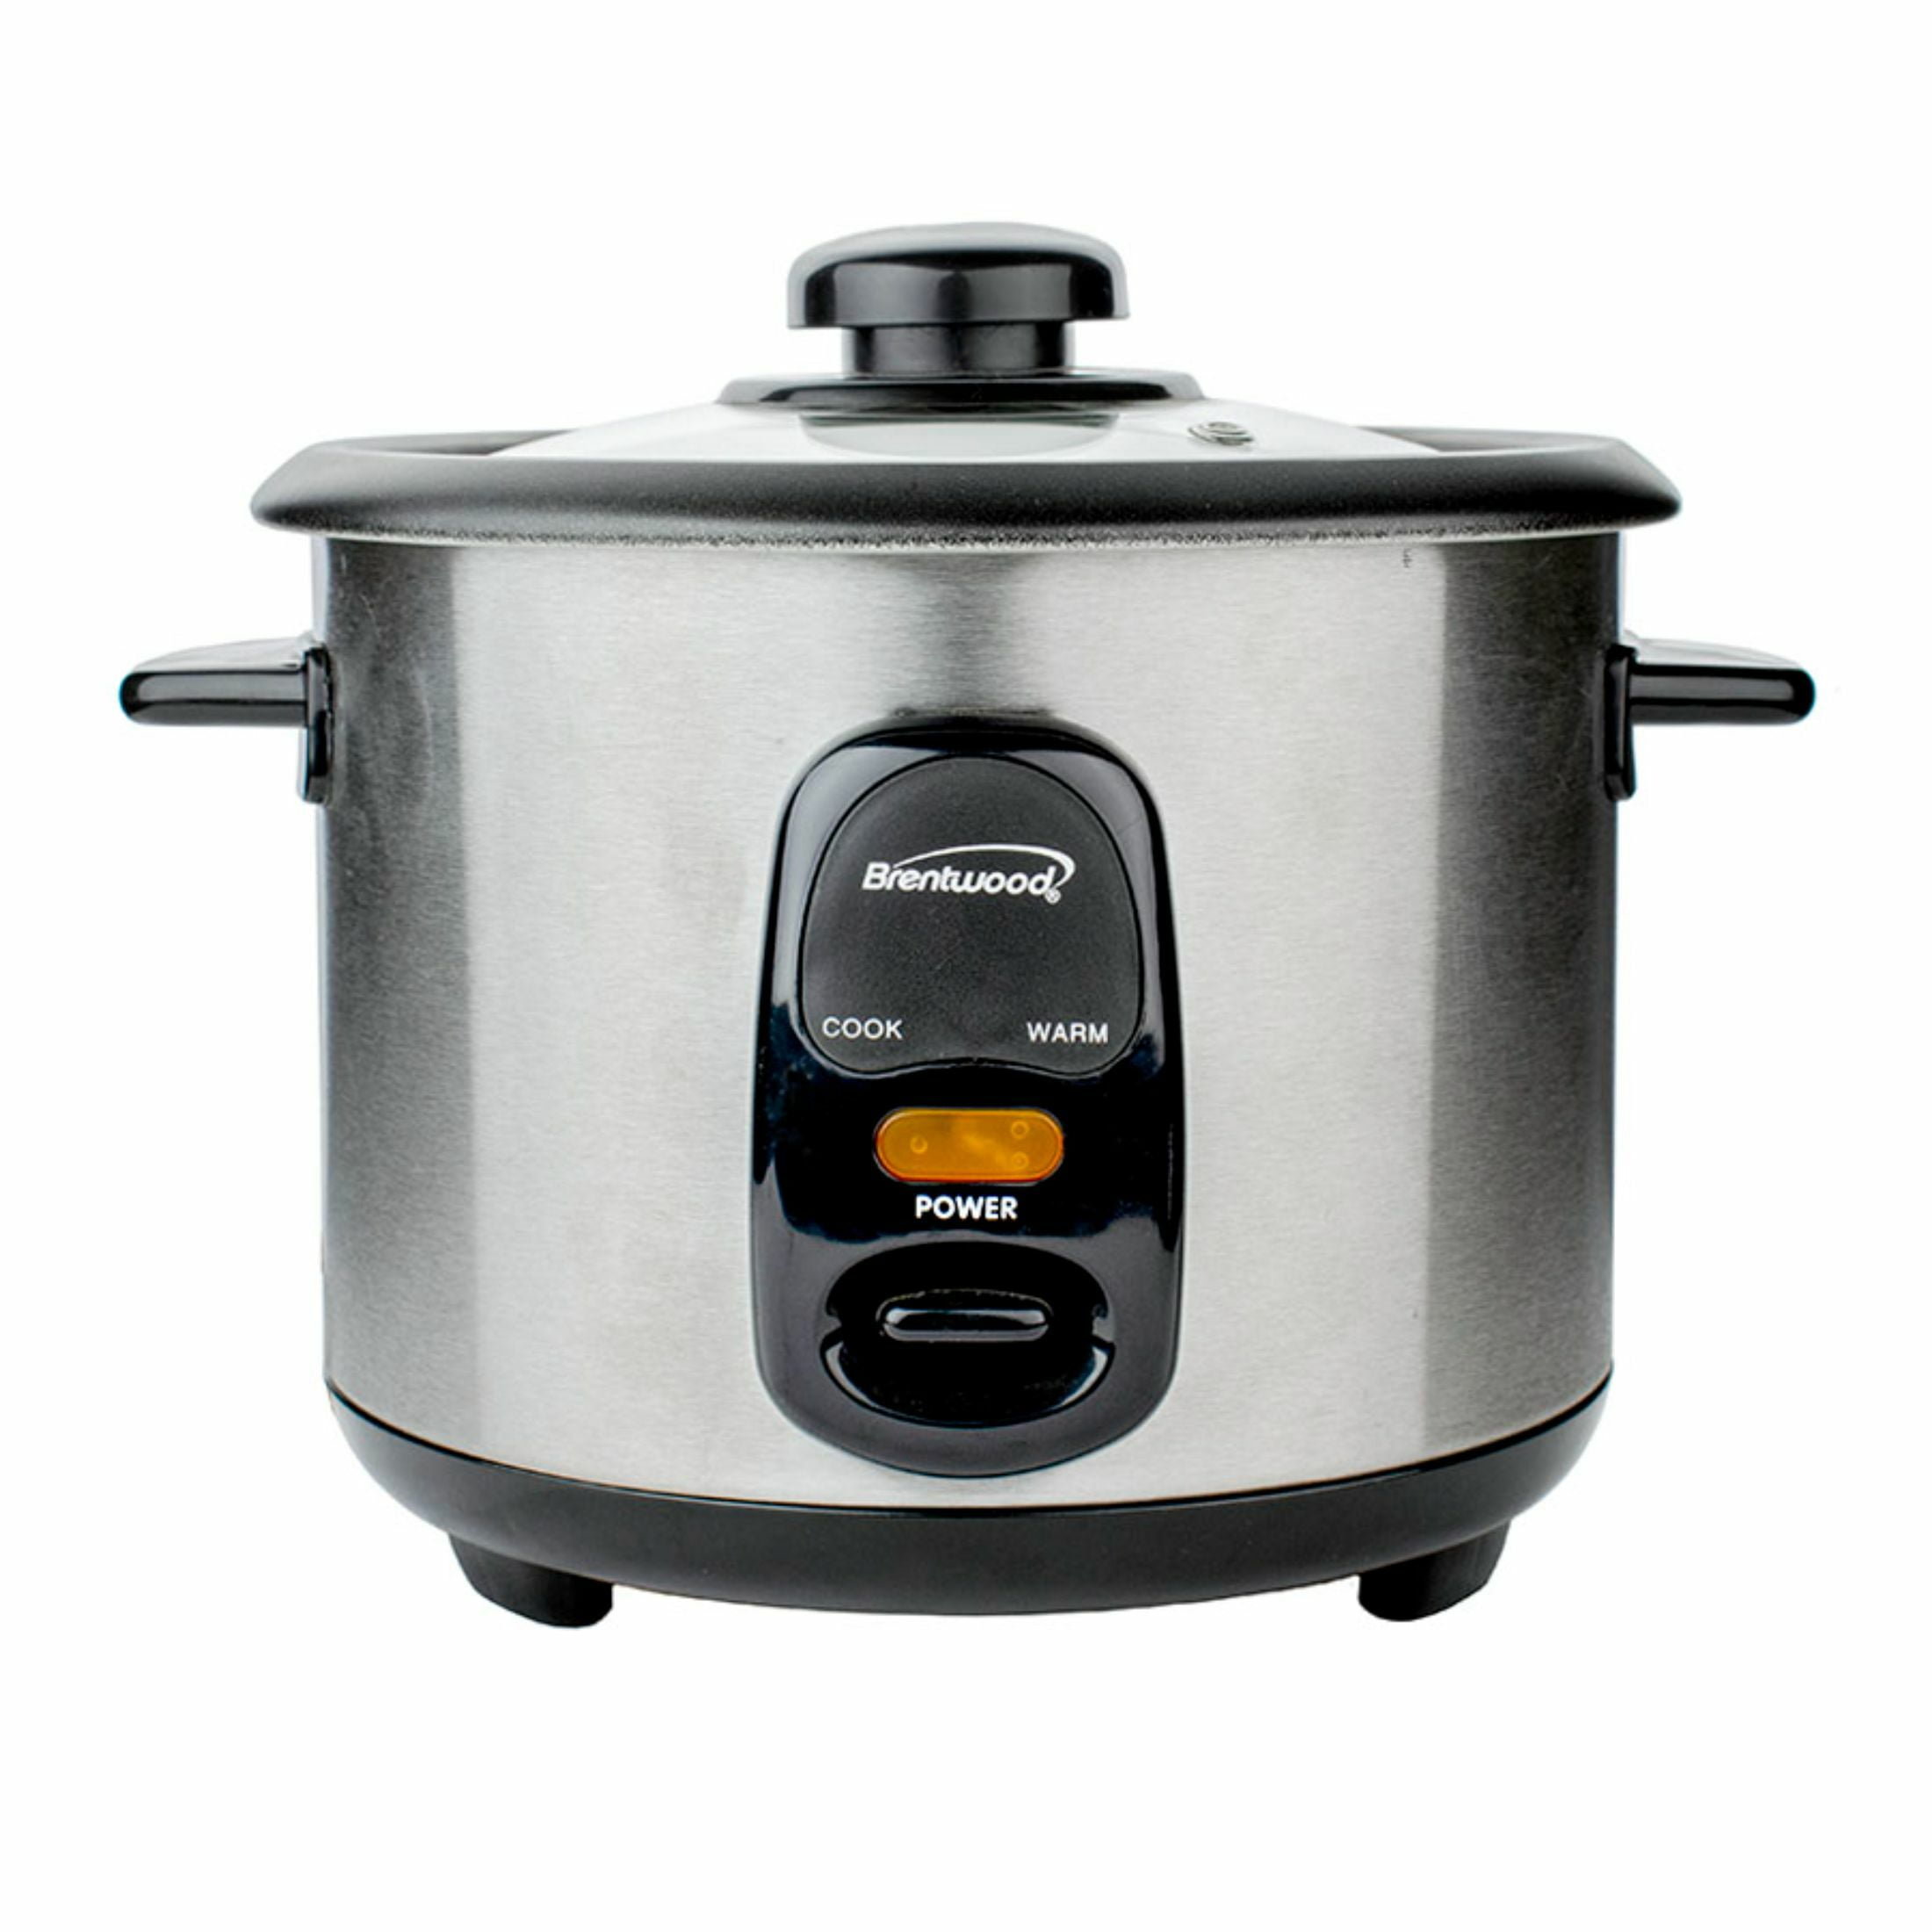 BLACK+DECKER Rice Cooker 16 Cups Cooked (8 Cups Uncooked) and Steamer -  household items - by owner - housewares sale 